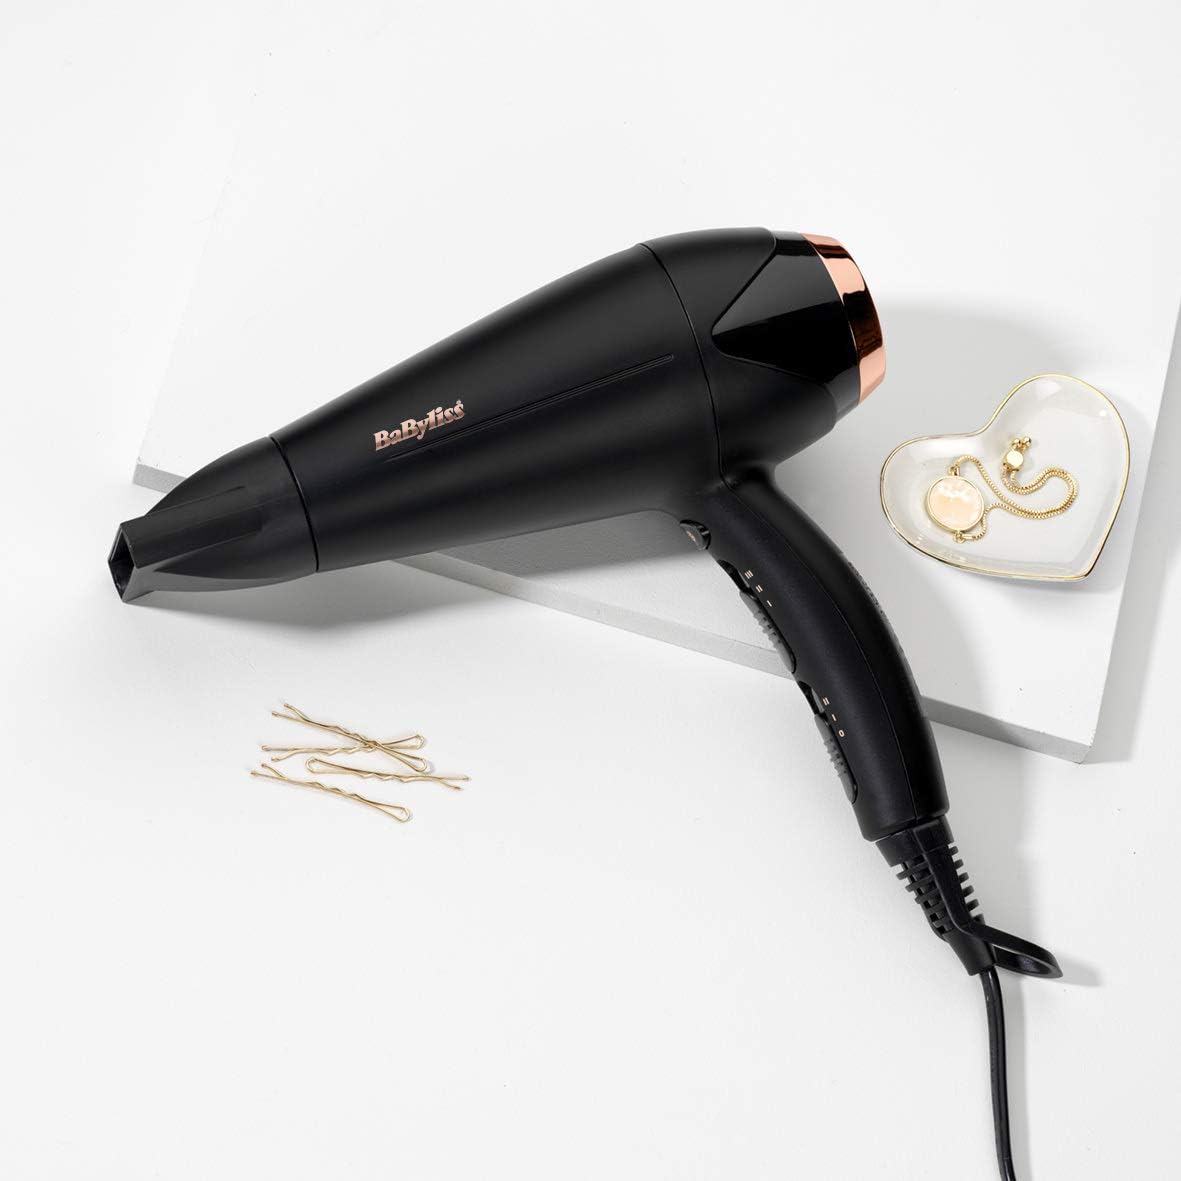 BaByliss DC Motor Hair Dryer | 2200W 3 Heat & 2 Speed Settings With Cool Shot Button | Ionic Technology For Frizz Free Hair | Comfortable Lightweight Black Design With Diffuser